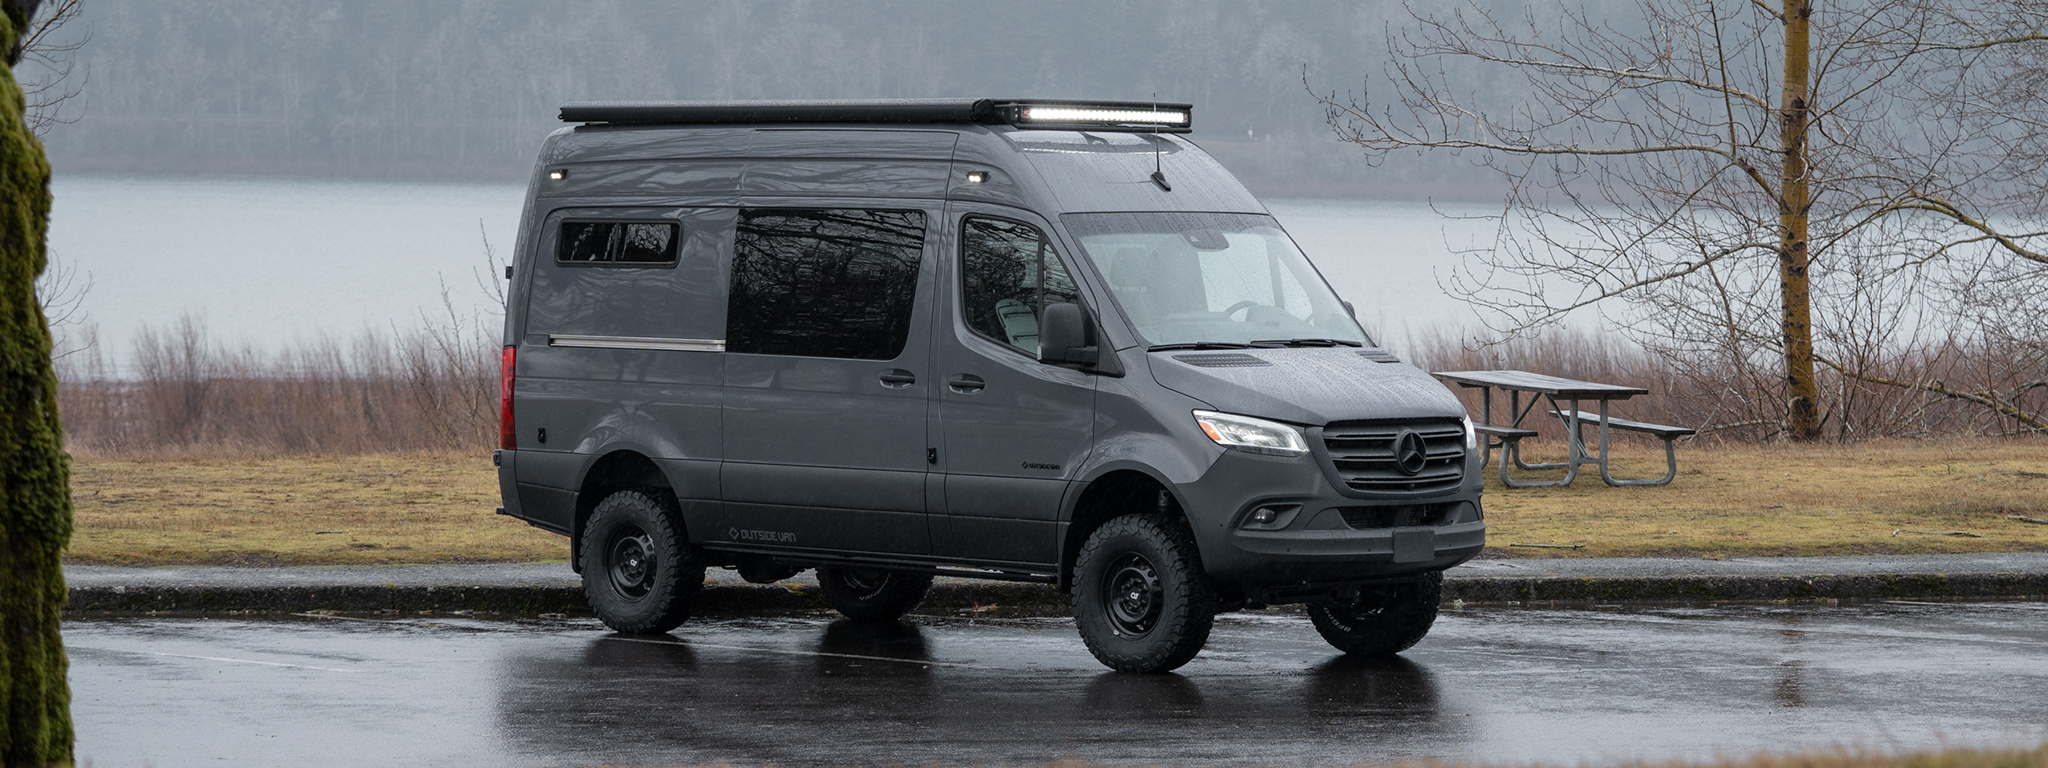 custom 2022 Mercedes-Benz Sprinter 144 high roof van 4WD seat two sleep two in a wet parking lot